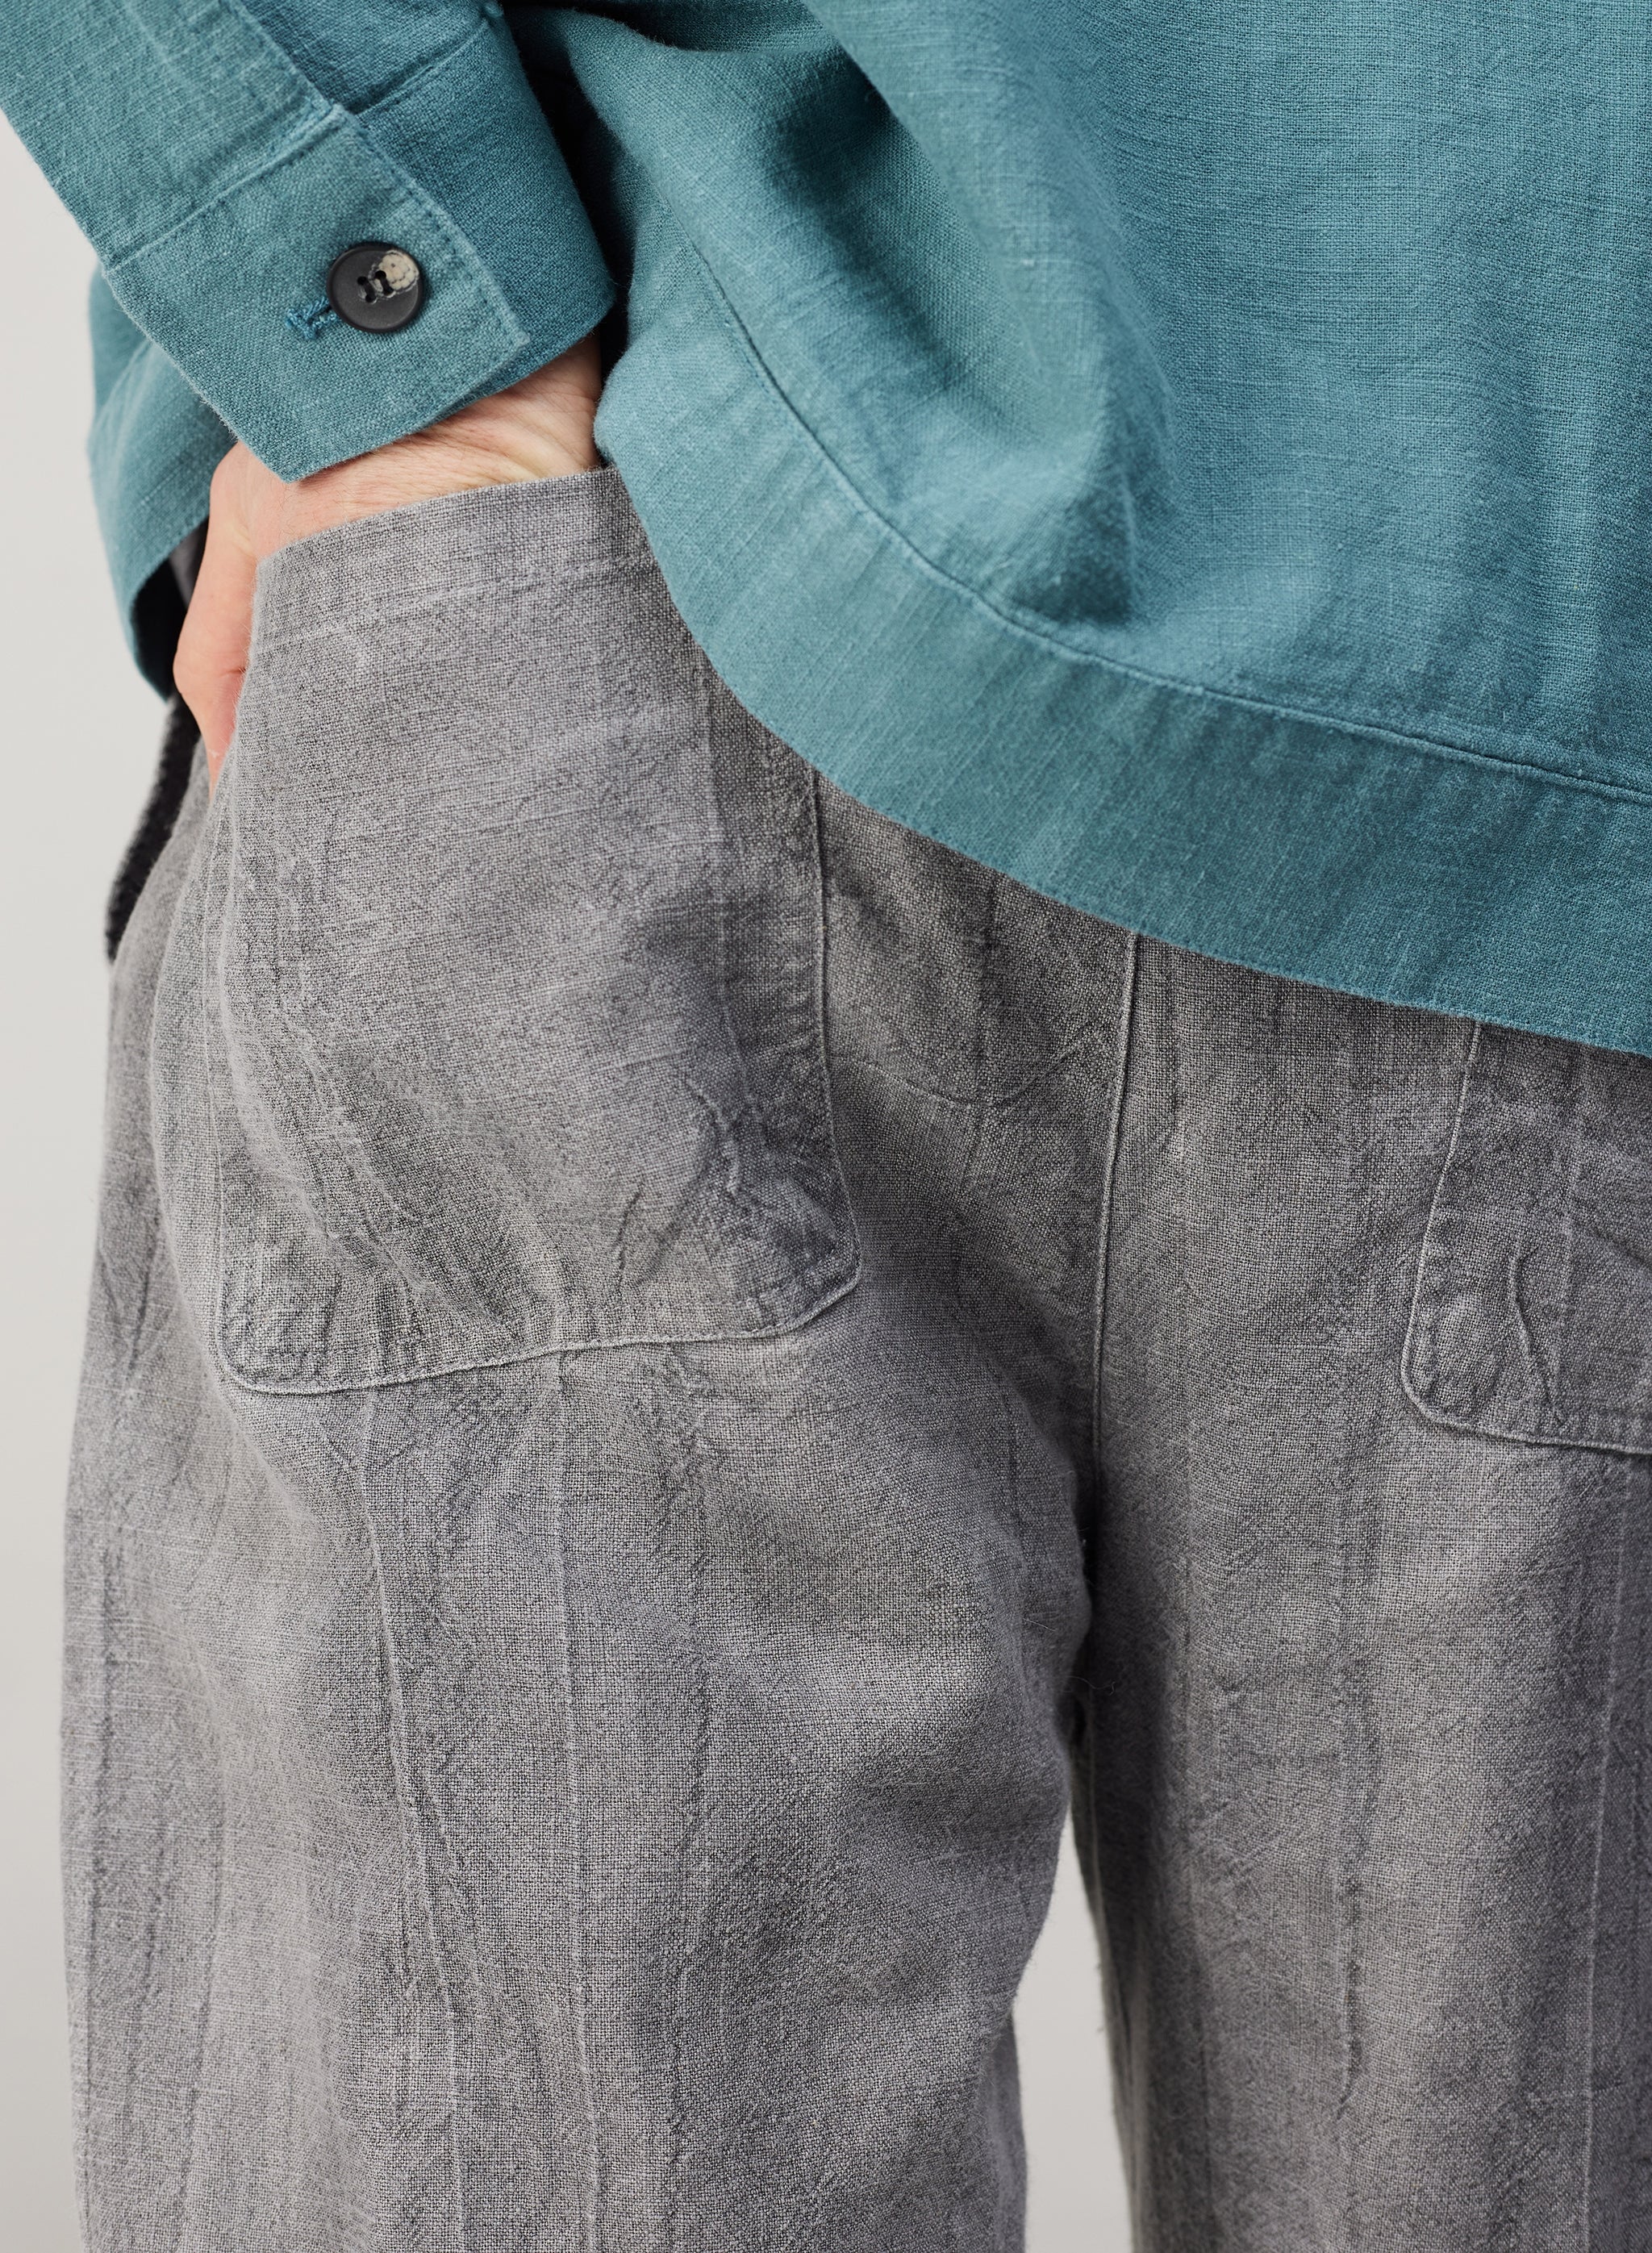 a pair of grey pants with a drawstring